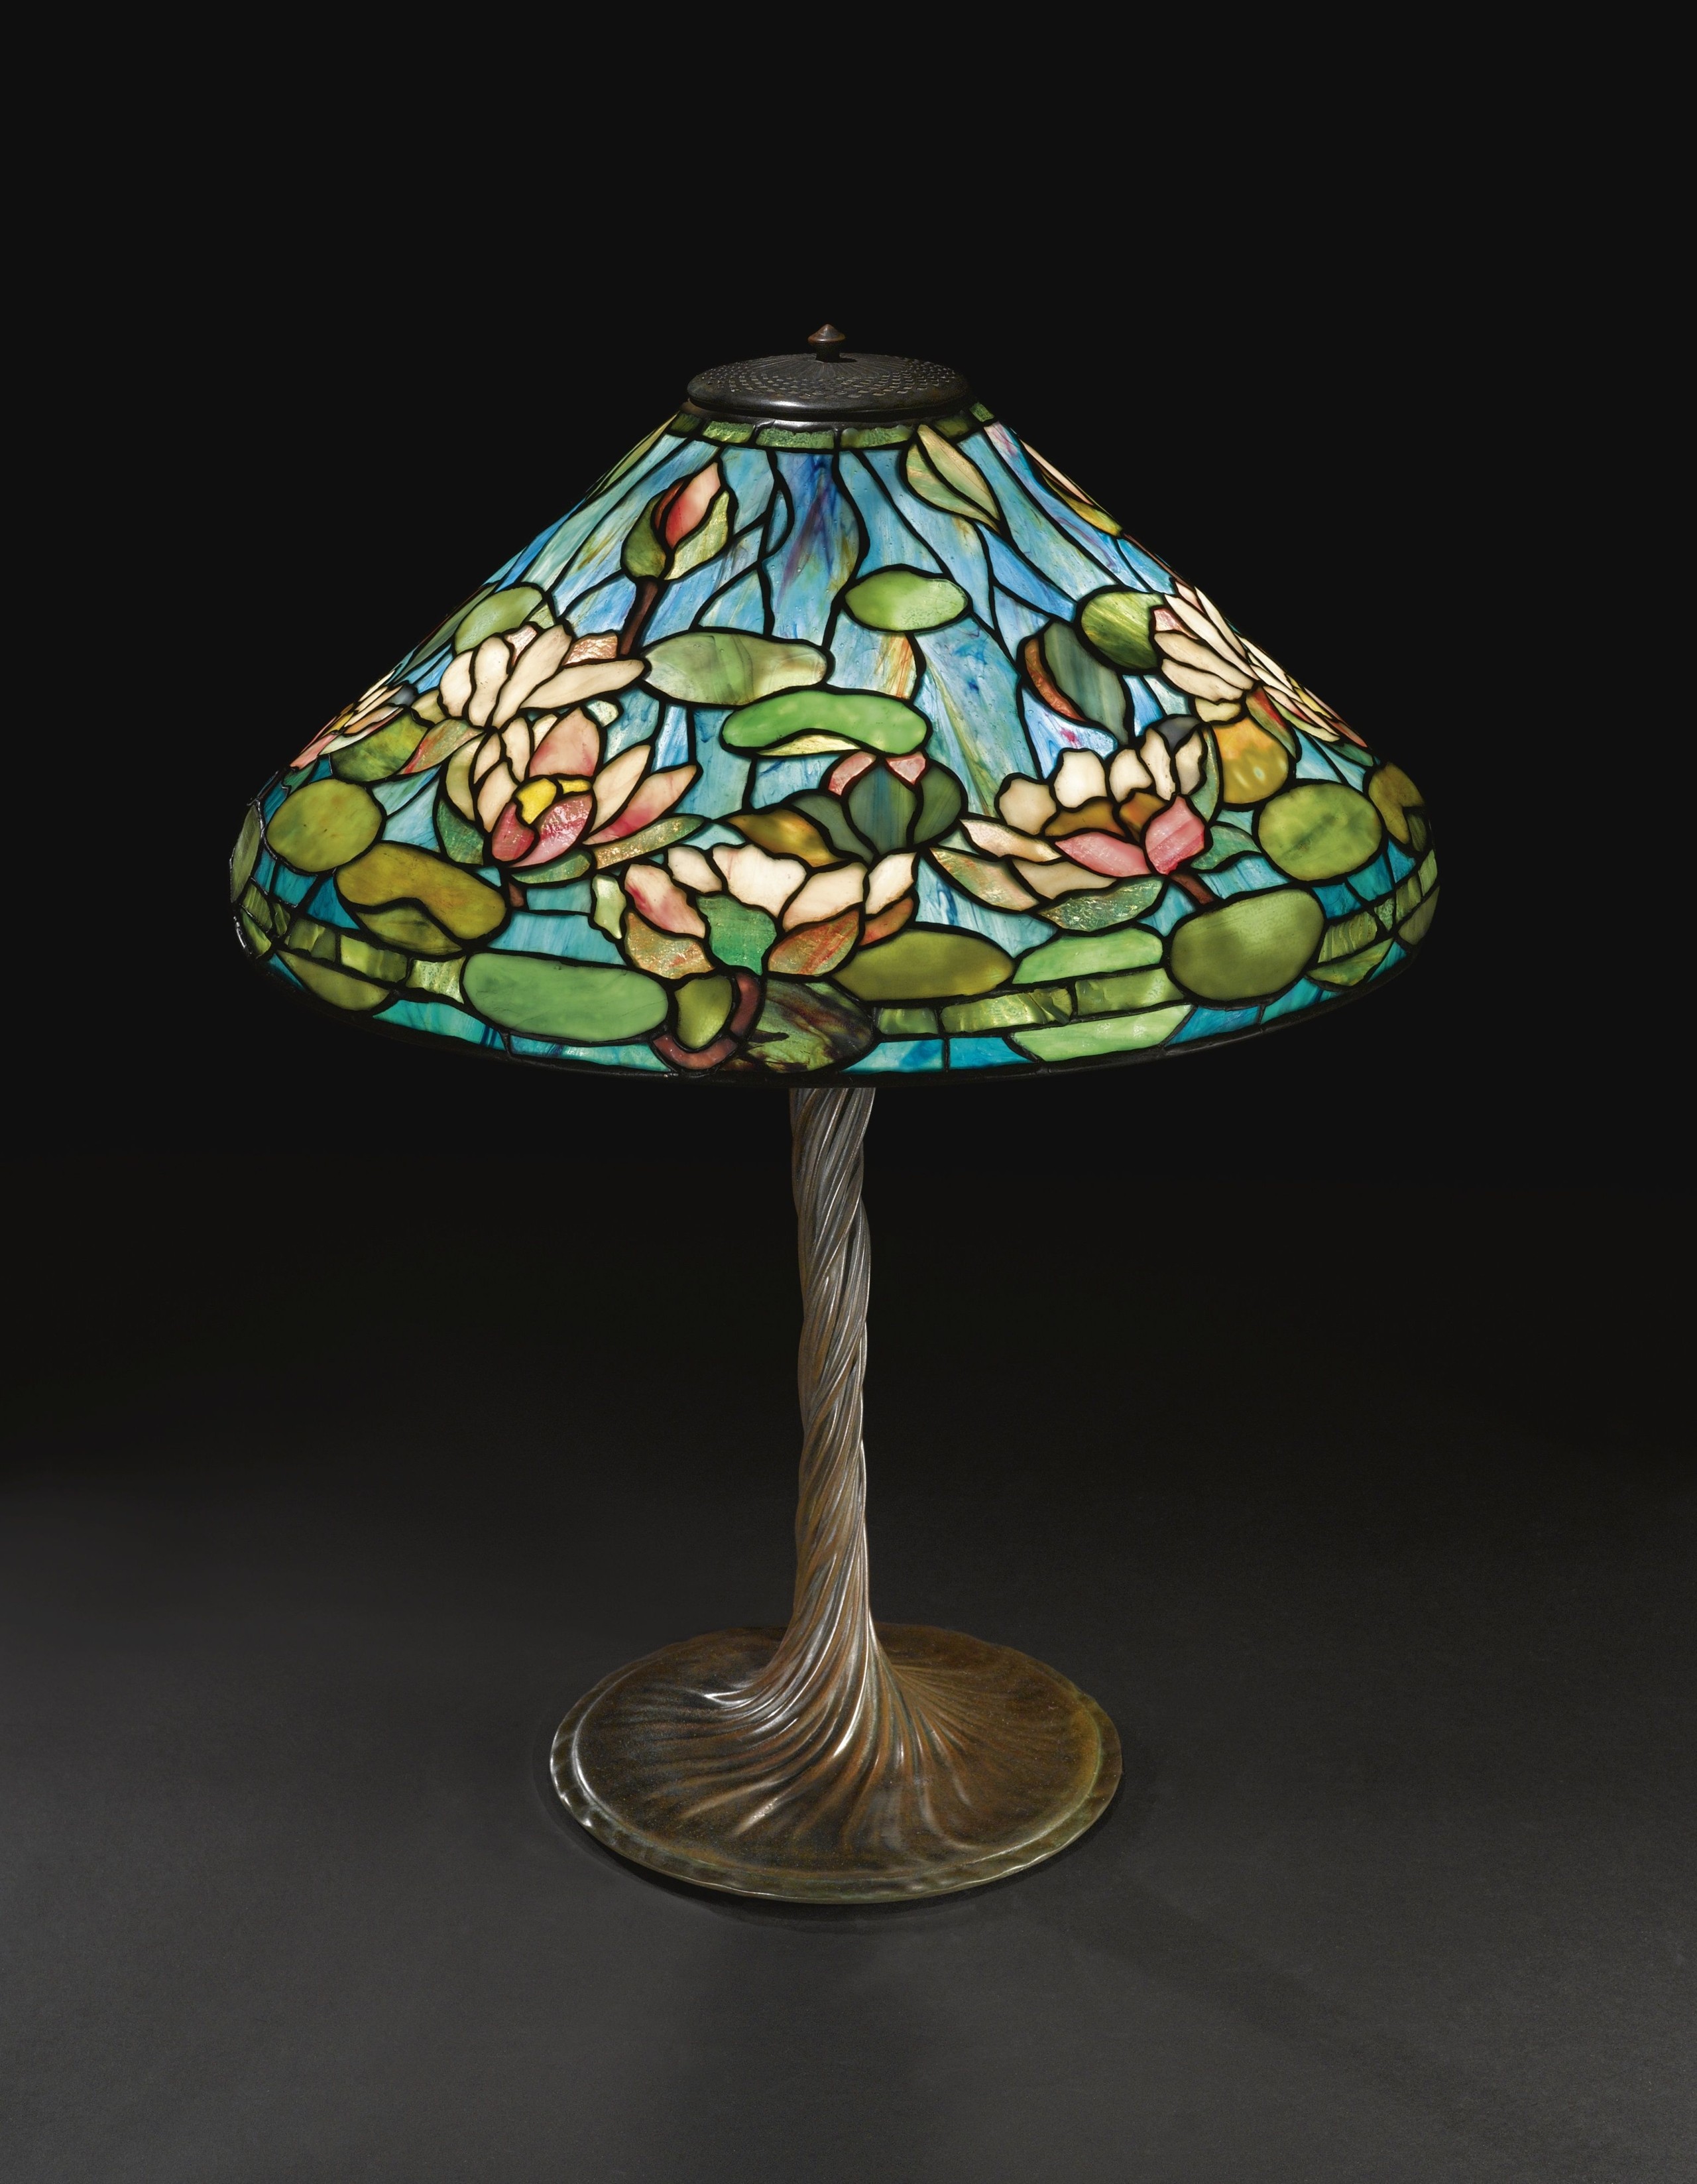 Tiffany studios a fine and rare pond lily table lamp